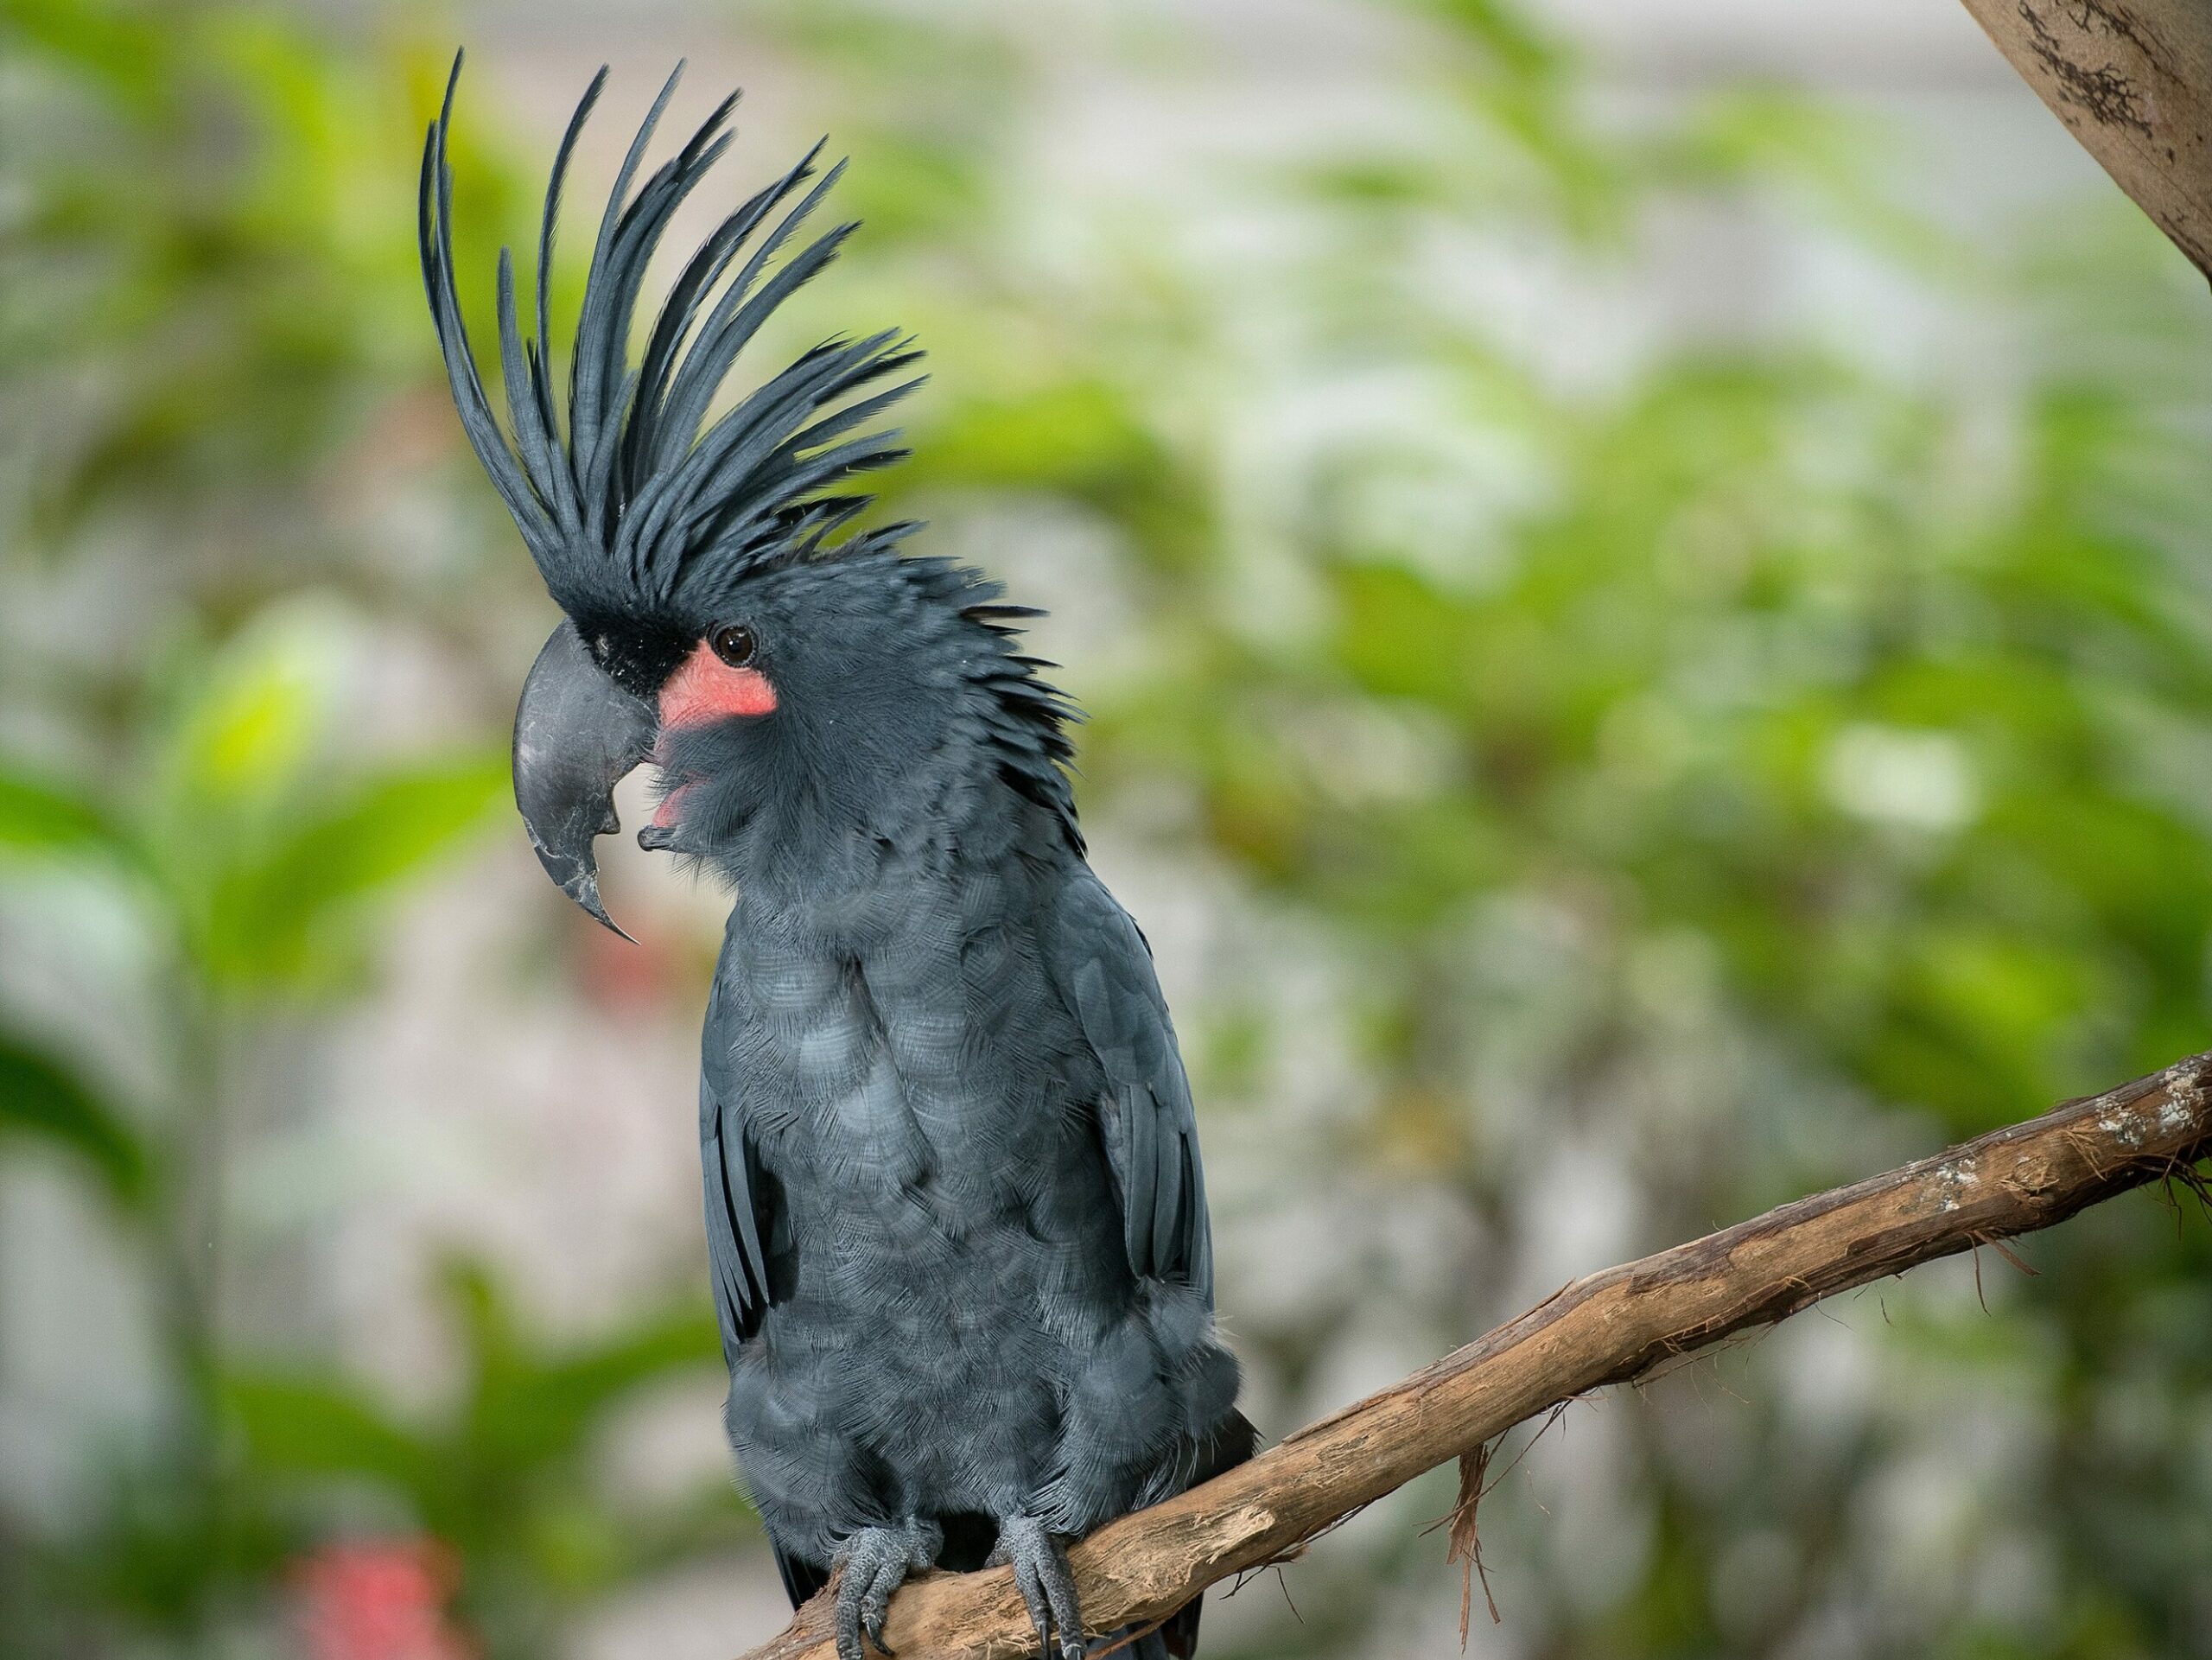 Palm Cockatoo perched on a branch